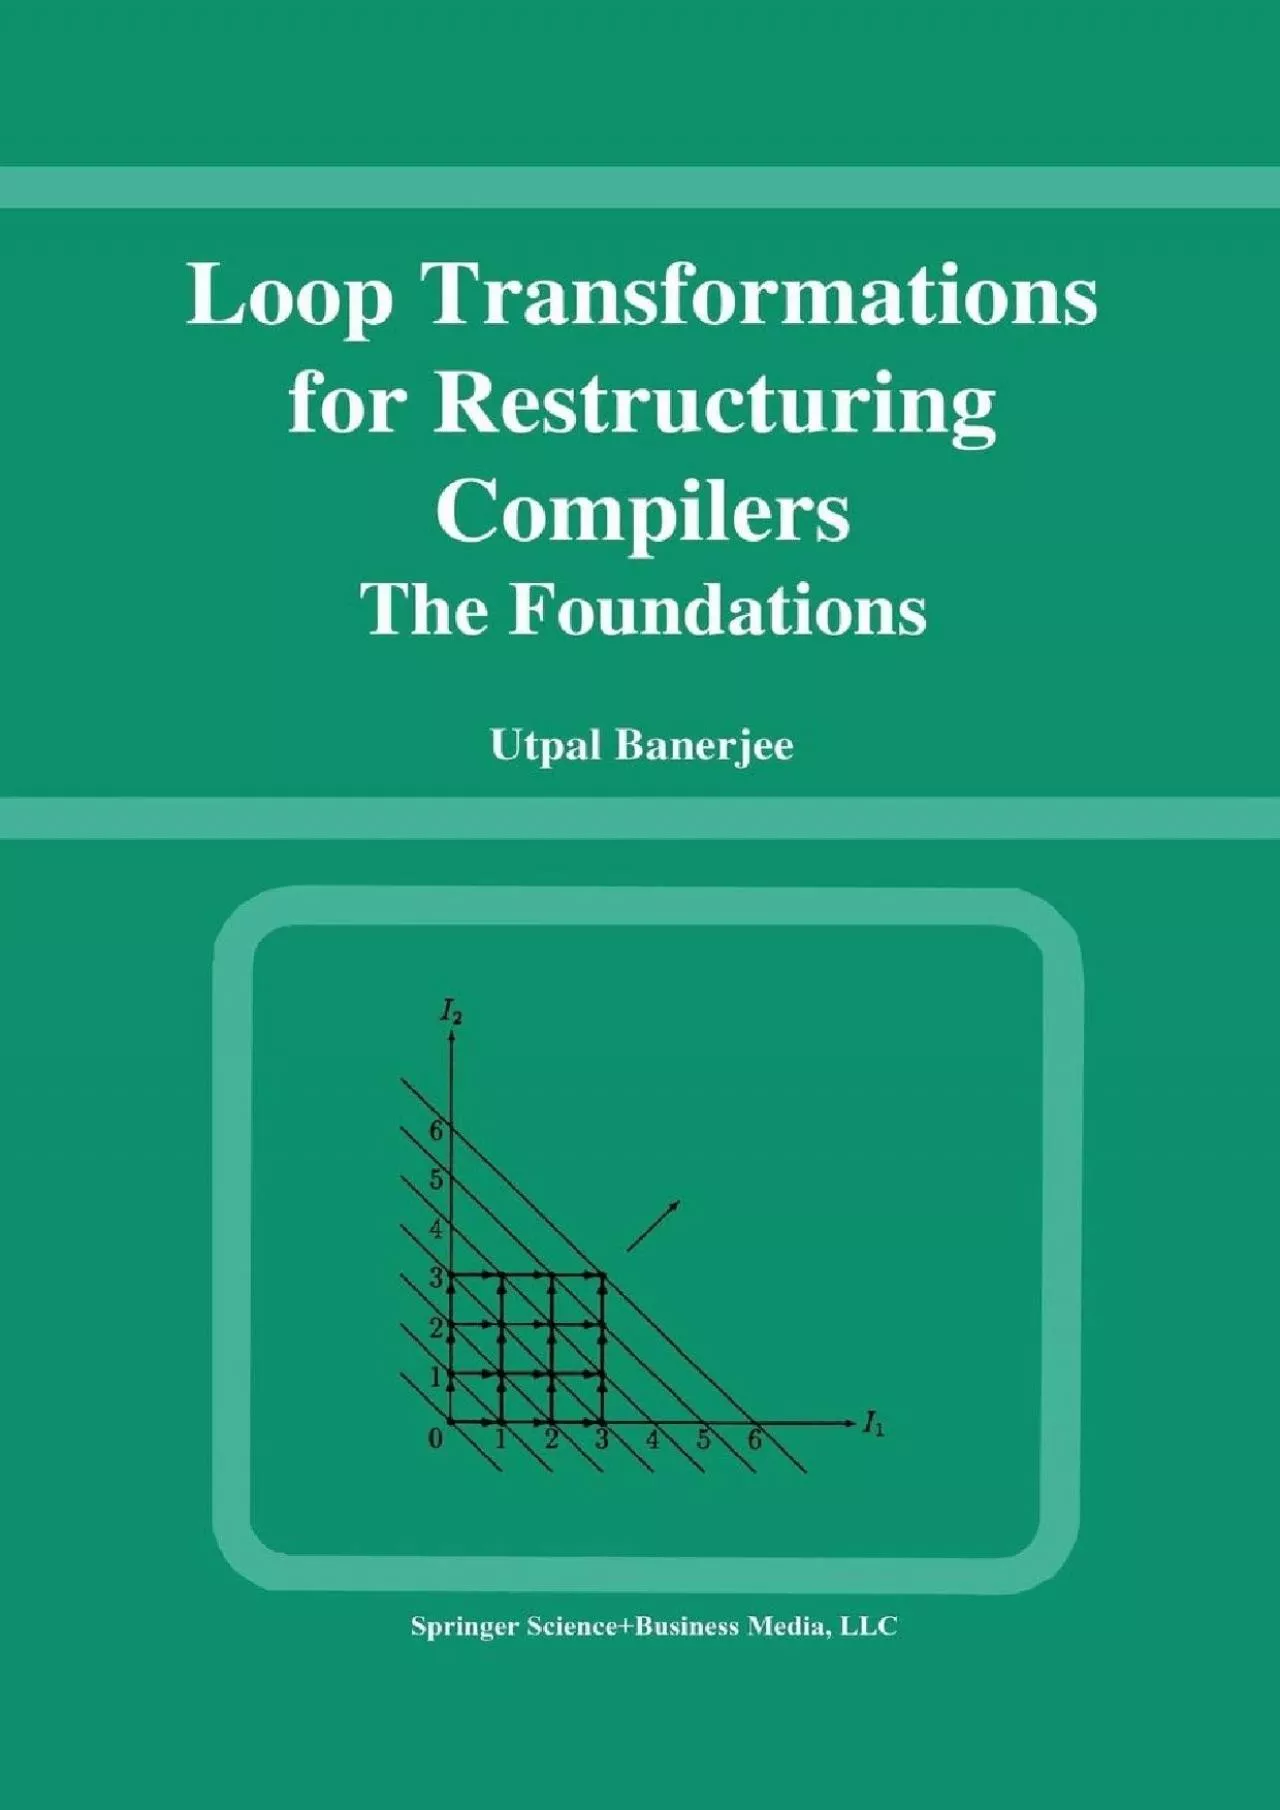 [READING BOOK]-Loop Transformations for Restructuring Compilers: The Foundations